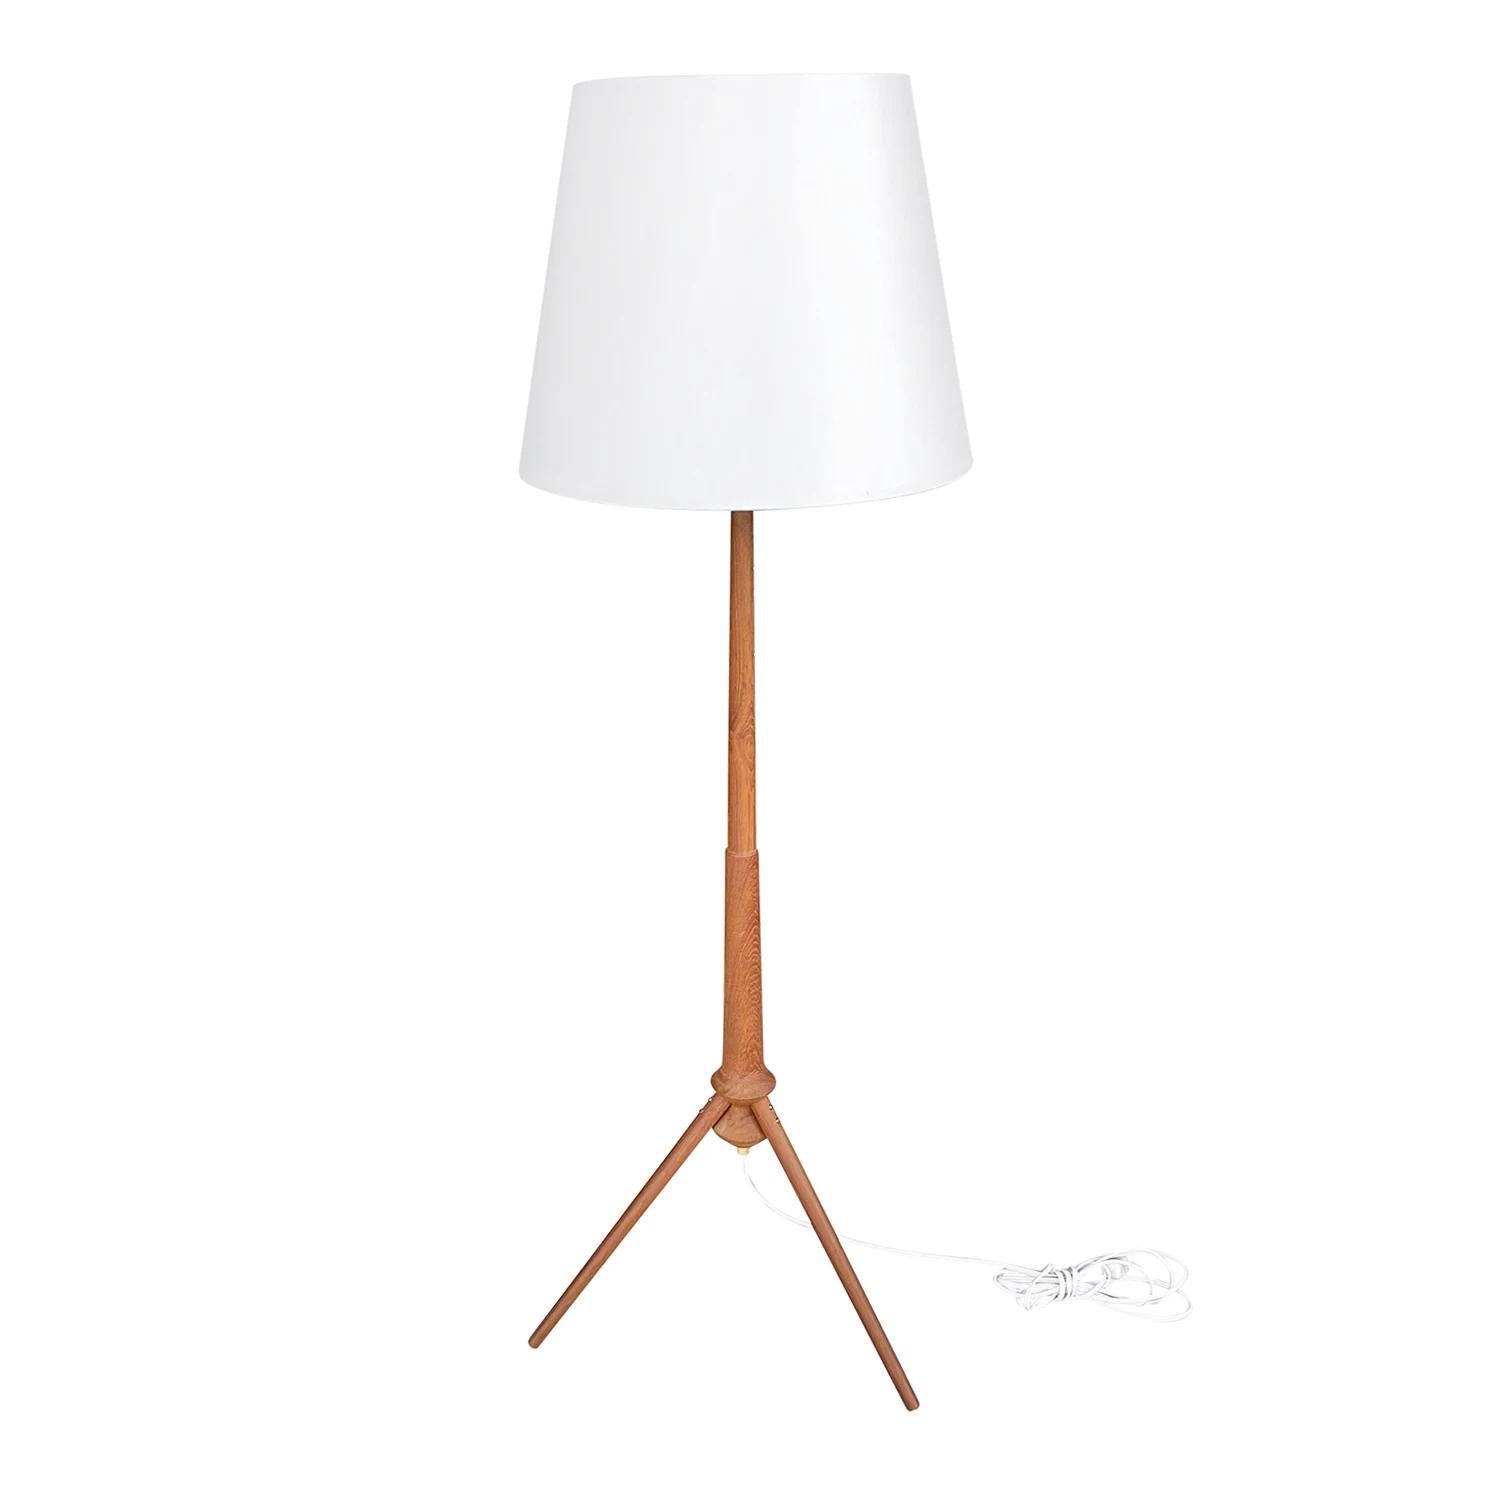 A vintage Mid-Century Modern Danish floor lamp made of hand crafted Teakwood, in good condition. The Scandinavian light is composed with a new white round shade, standing on three curved legs. The wires have been renewed. Wear consistent with age